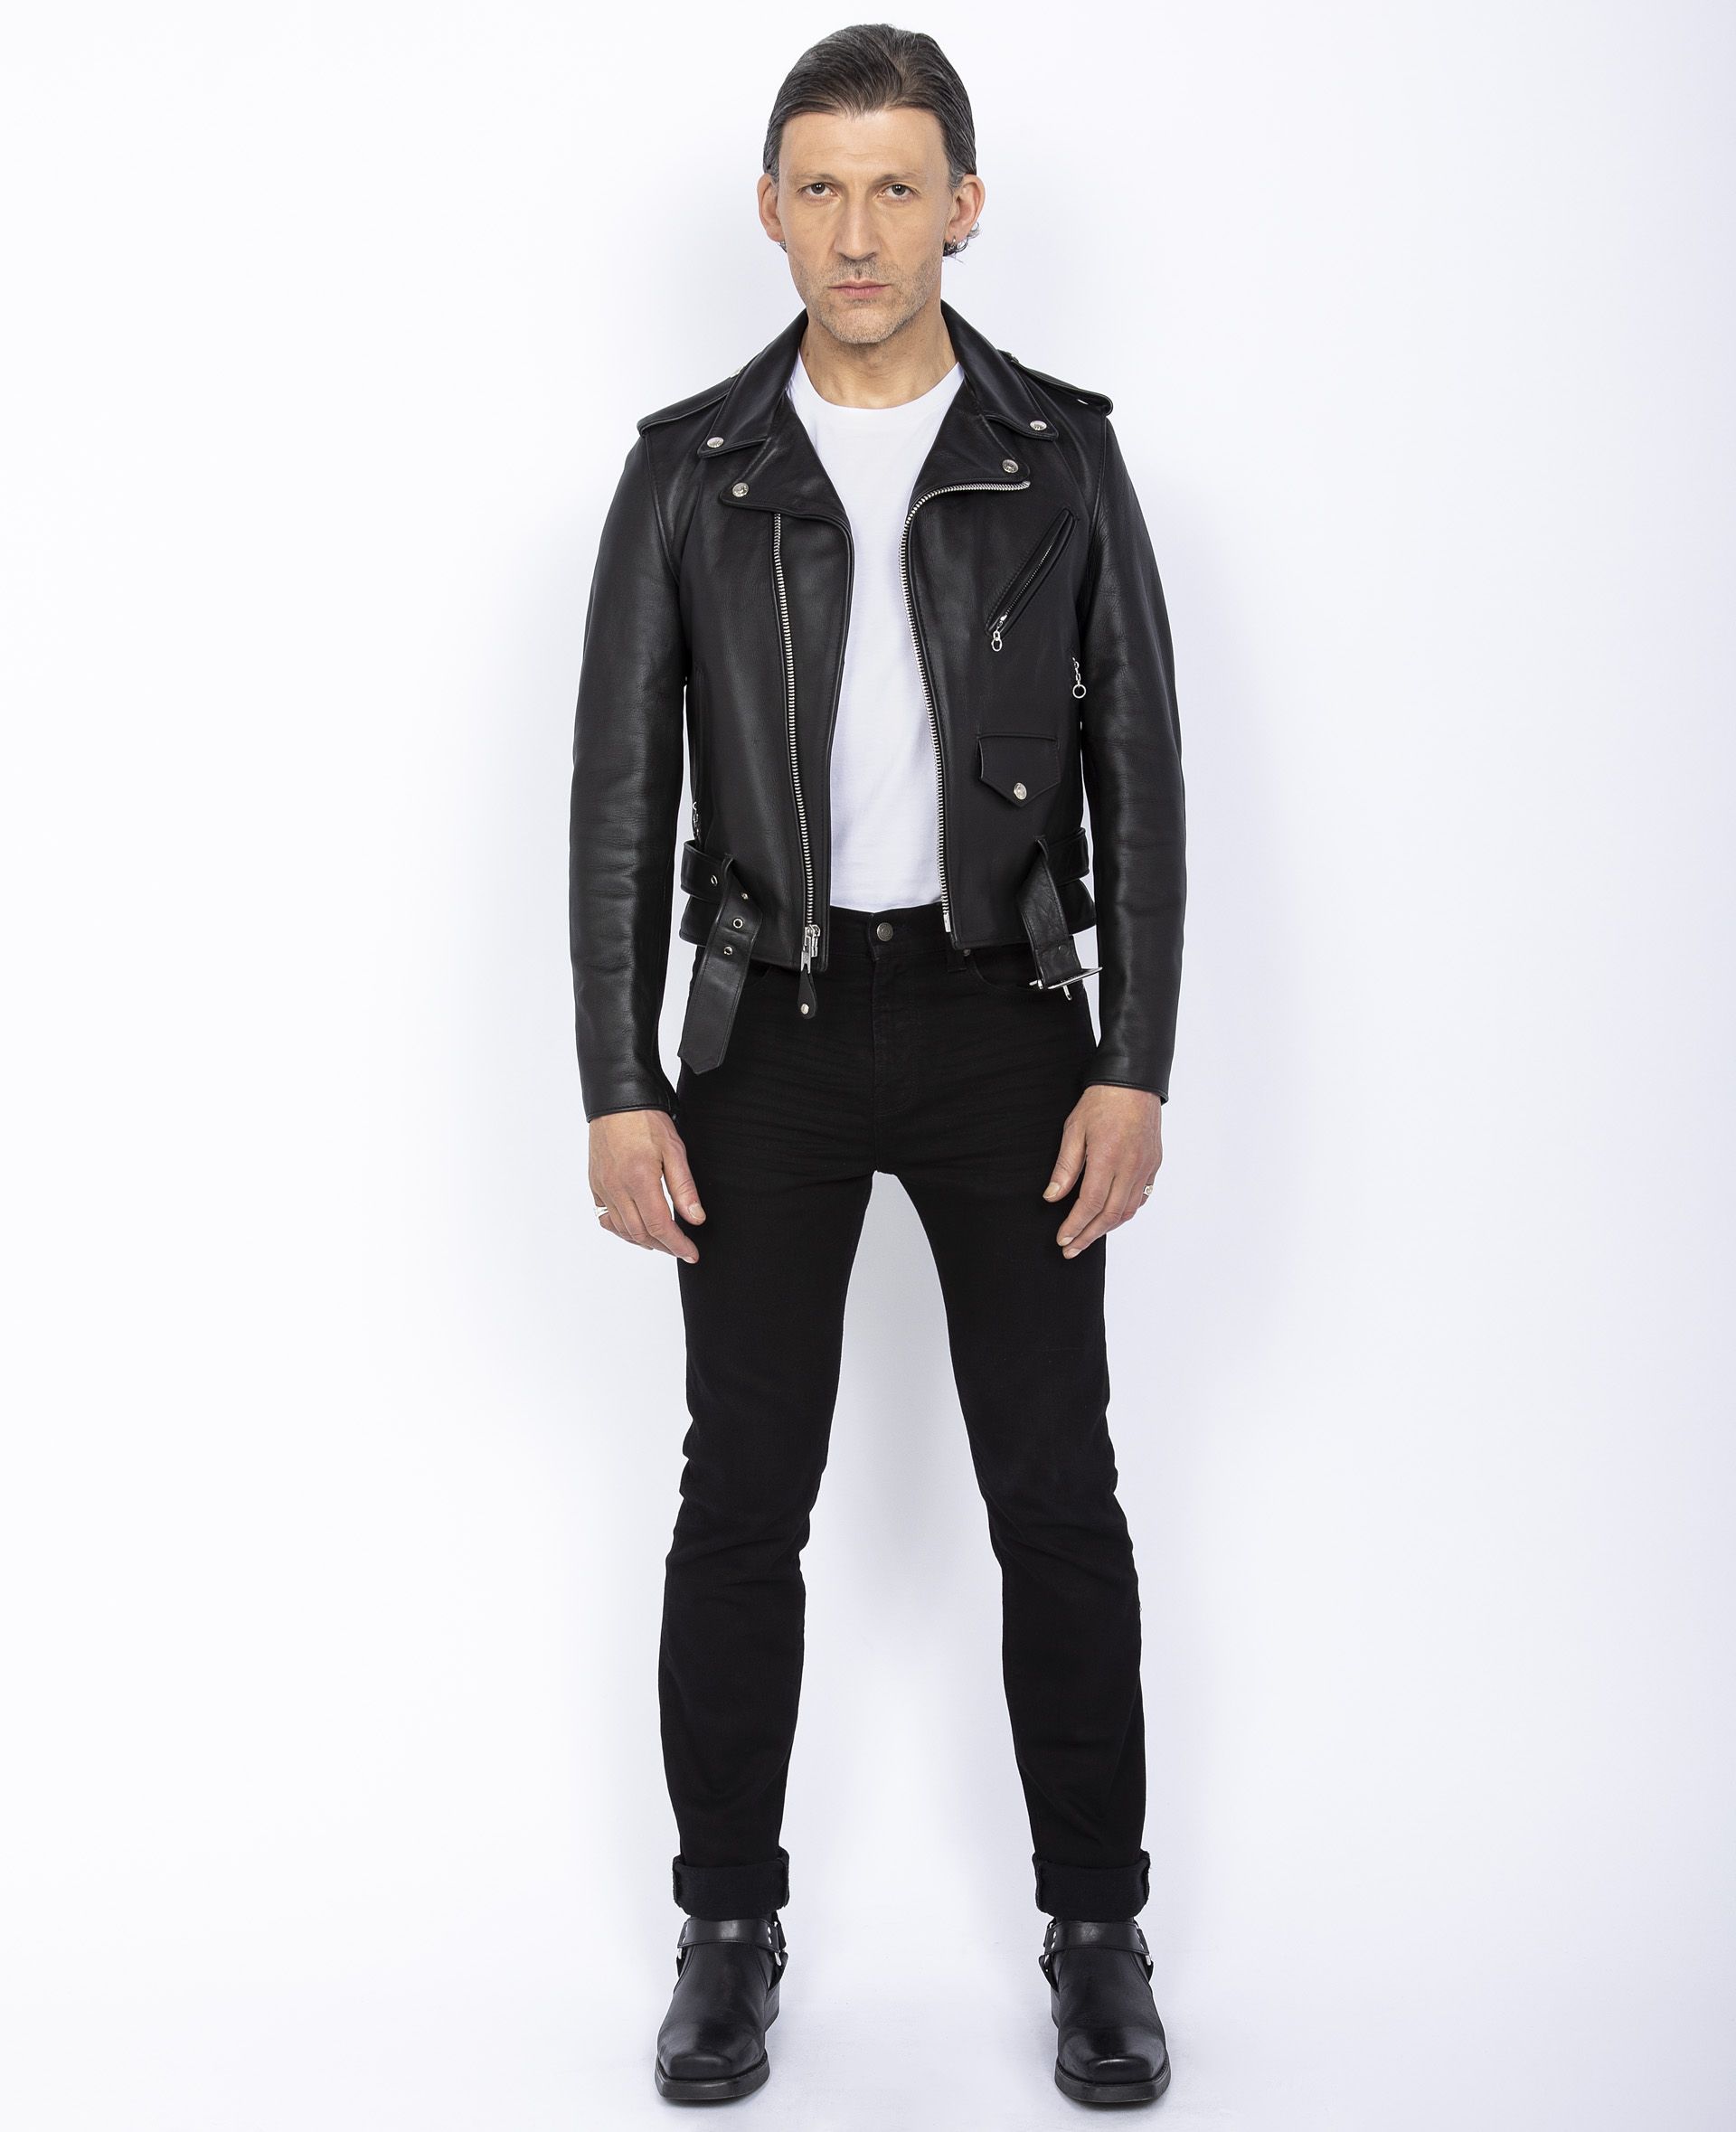 Buy Iconic Perfecto® jacket, cowhide leather man 100% Cowhide leather